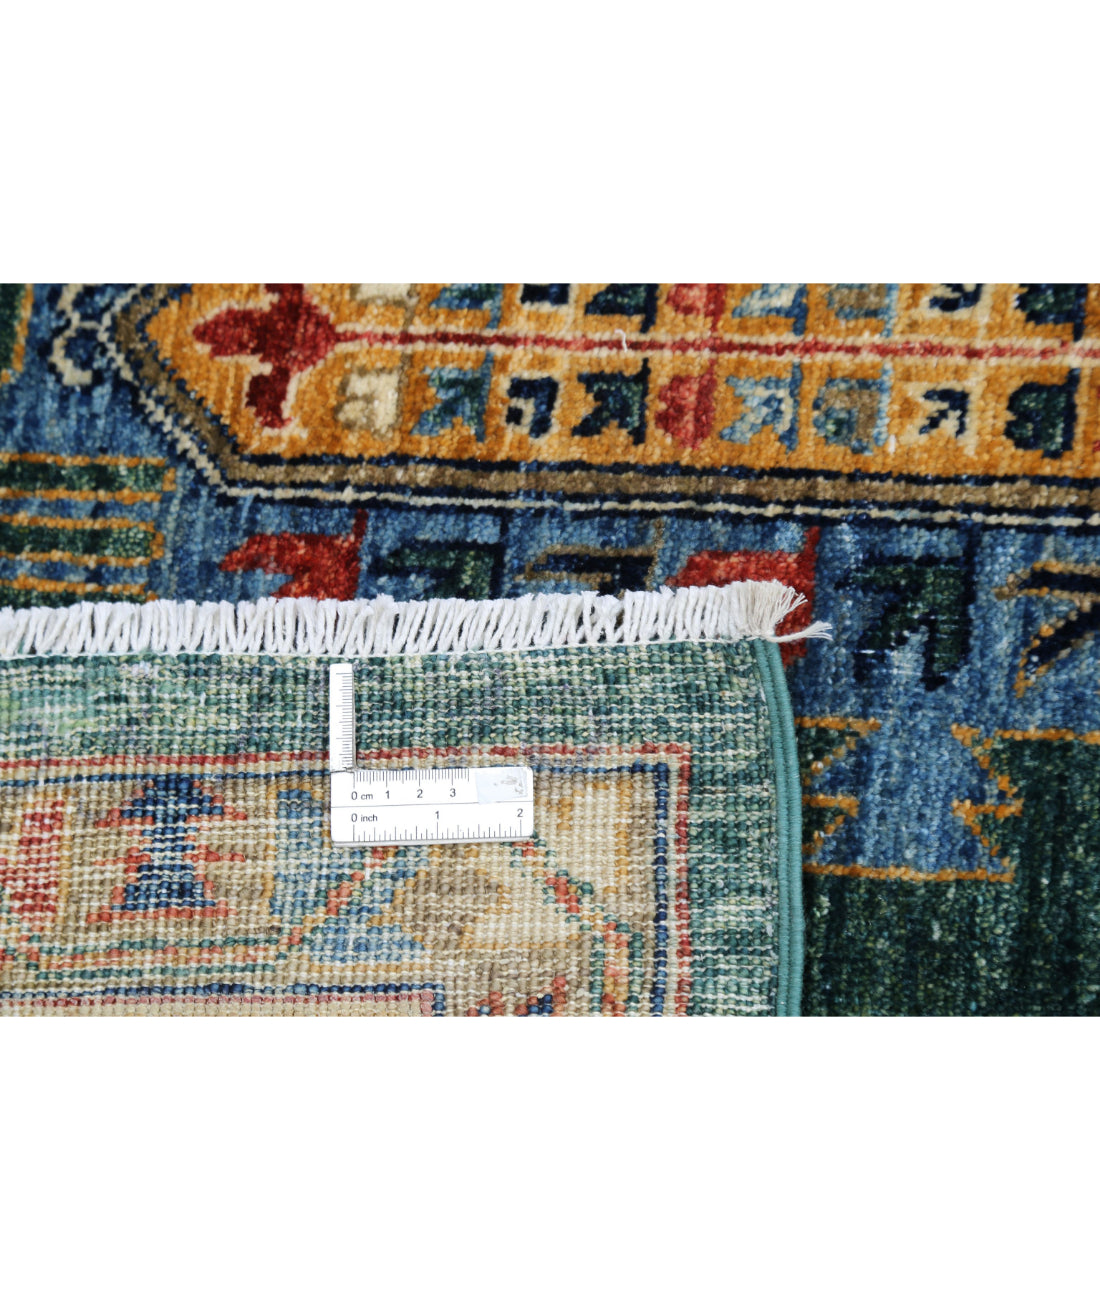 Hand Knotted Nomadic Caucasian Humna Wool Rug - 11'9'' x 14'7'' 11'9'' x 14'7'' (353 X 438) / Green / Blue